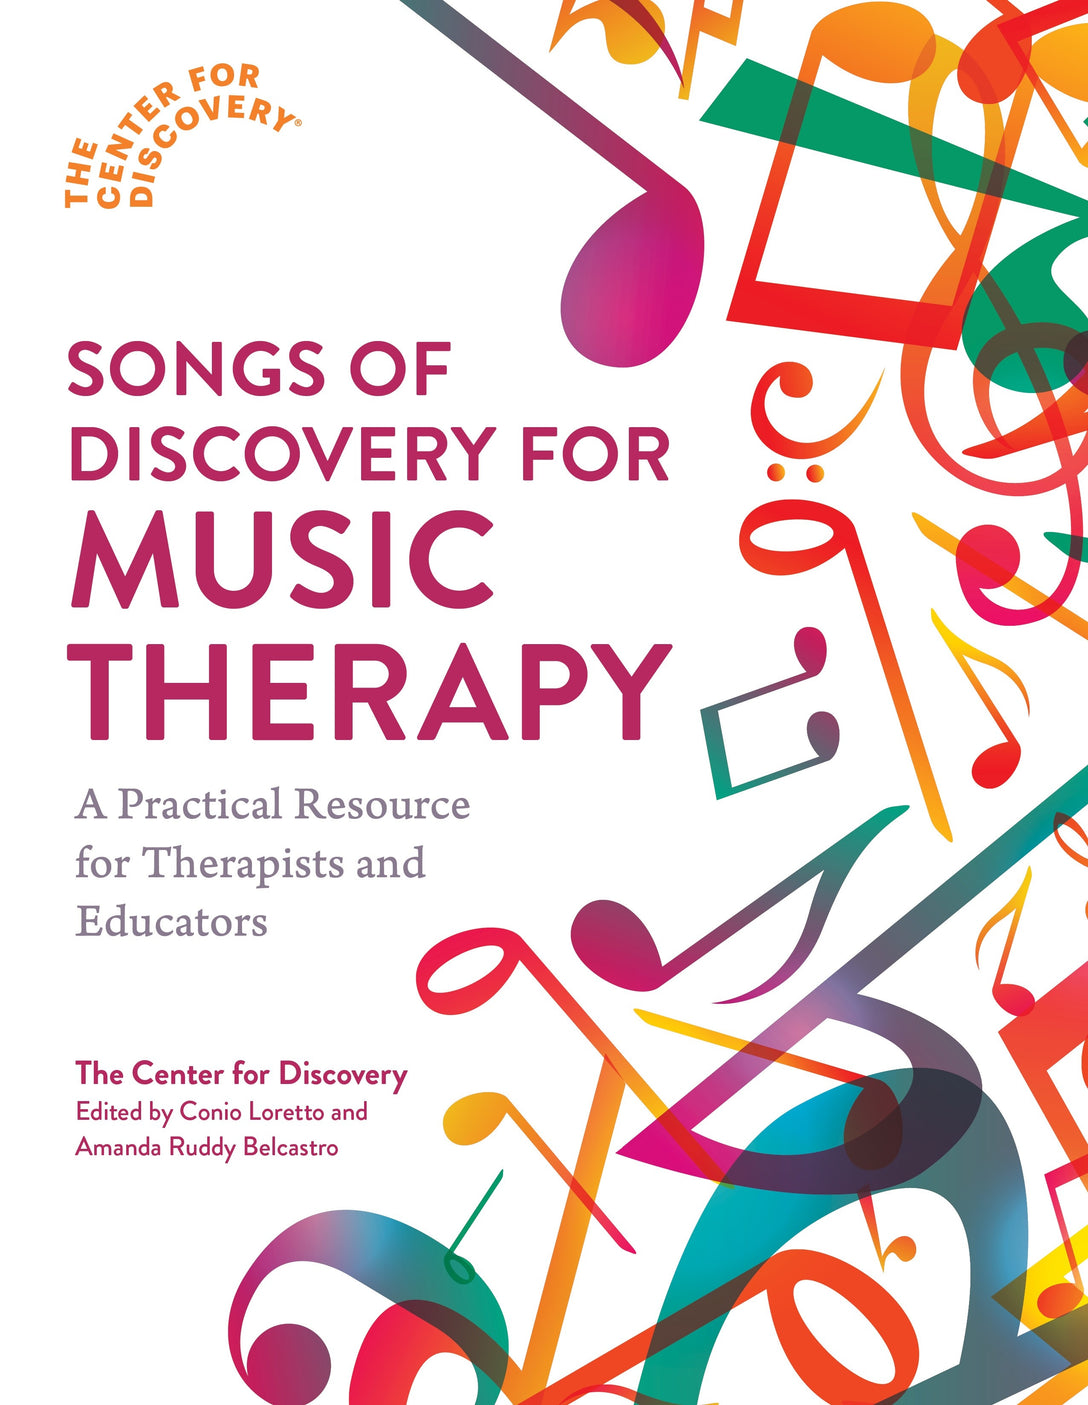 Songs of Discovery for Music Therapy by Conio Loretto, Amanda Ruddy Belcastro, The Center for Discovery®